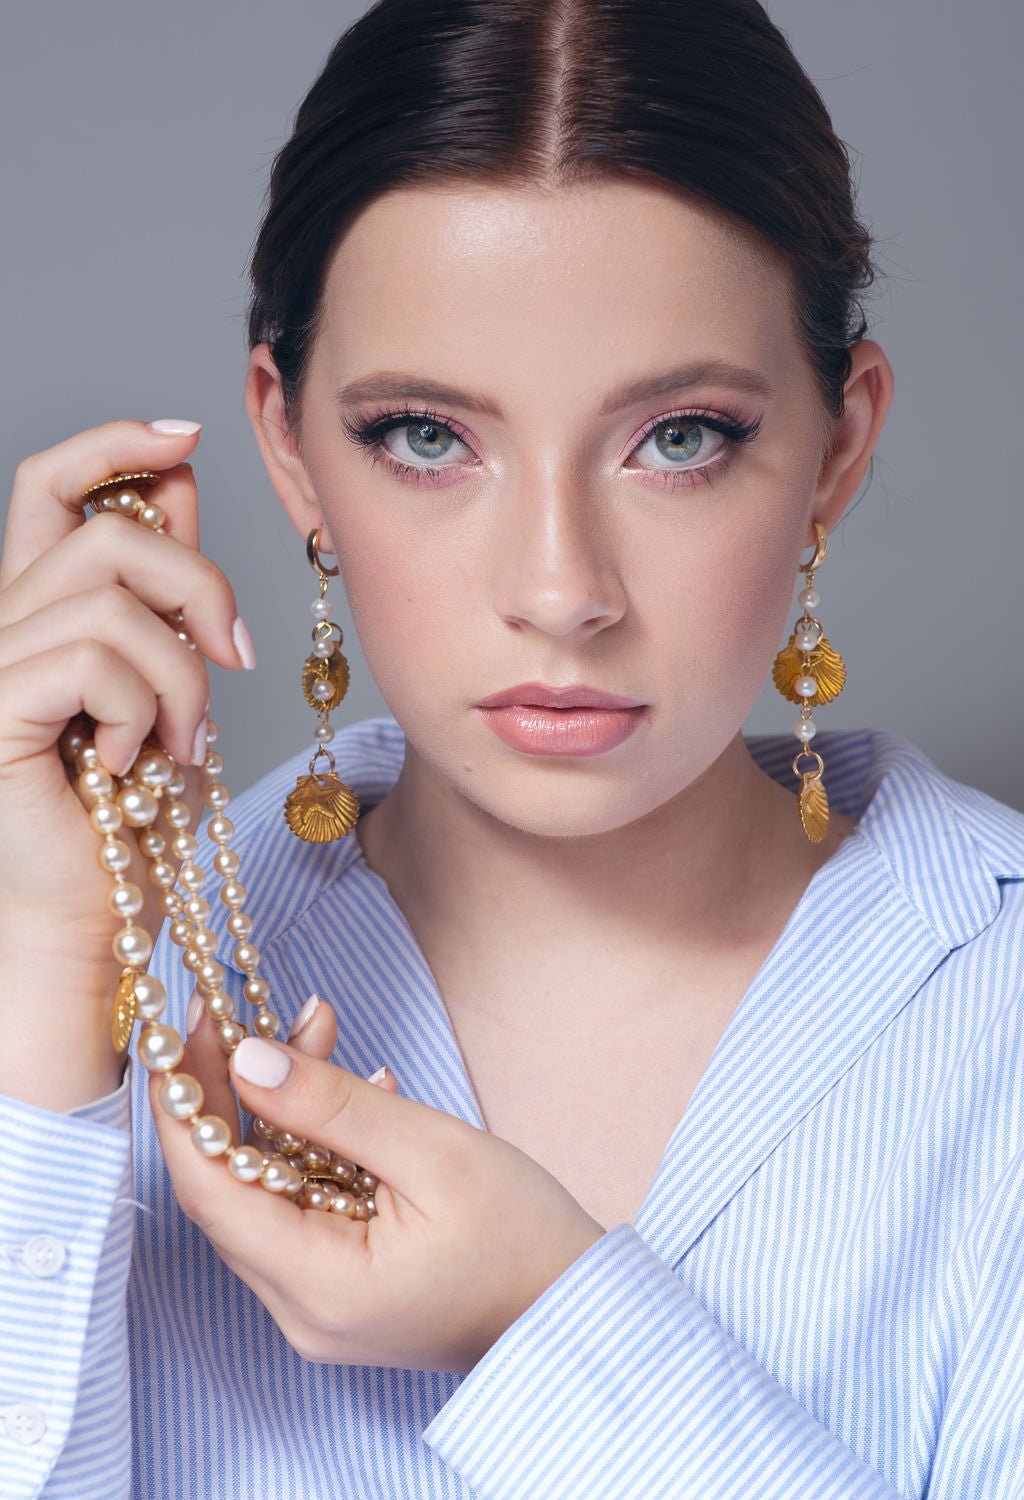 Vintage shell gold plated earrings or necklace - Natalia Willmott